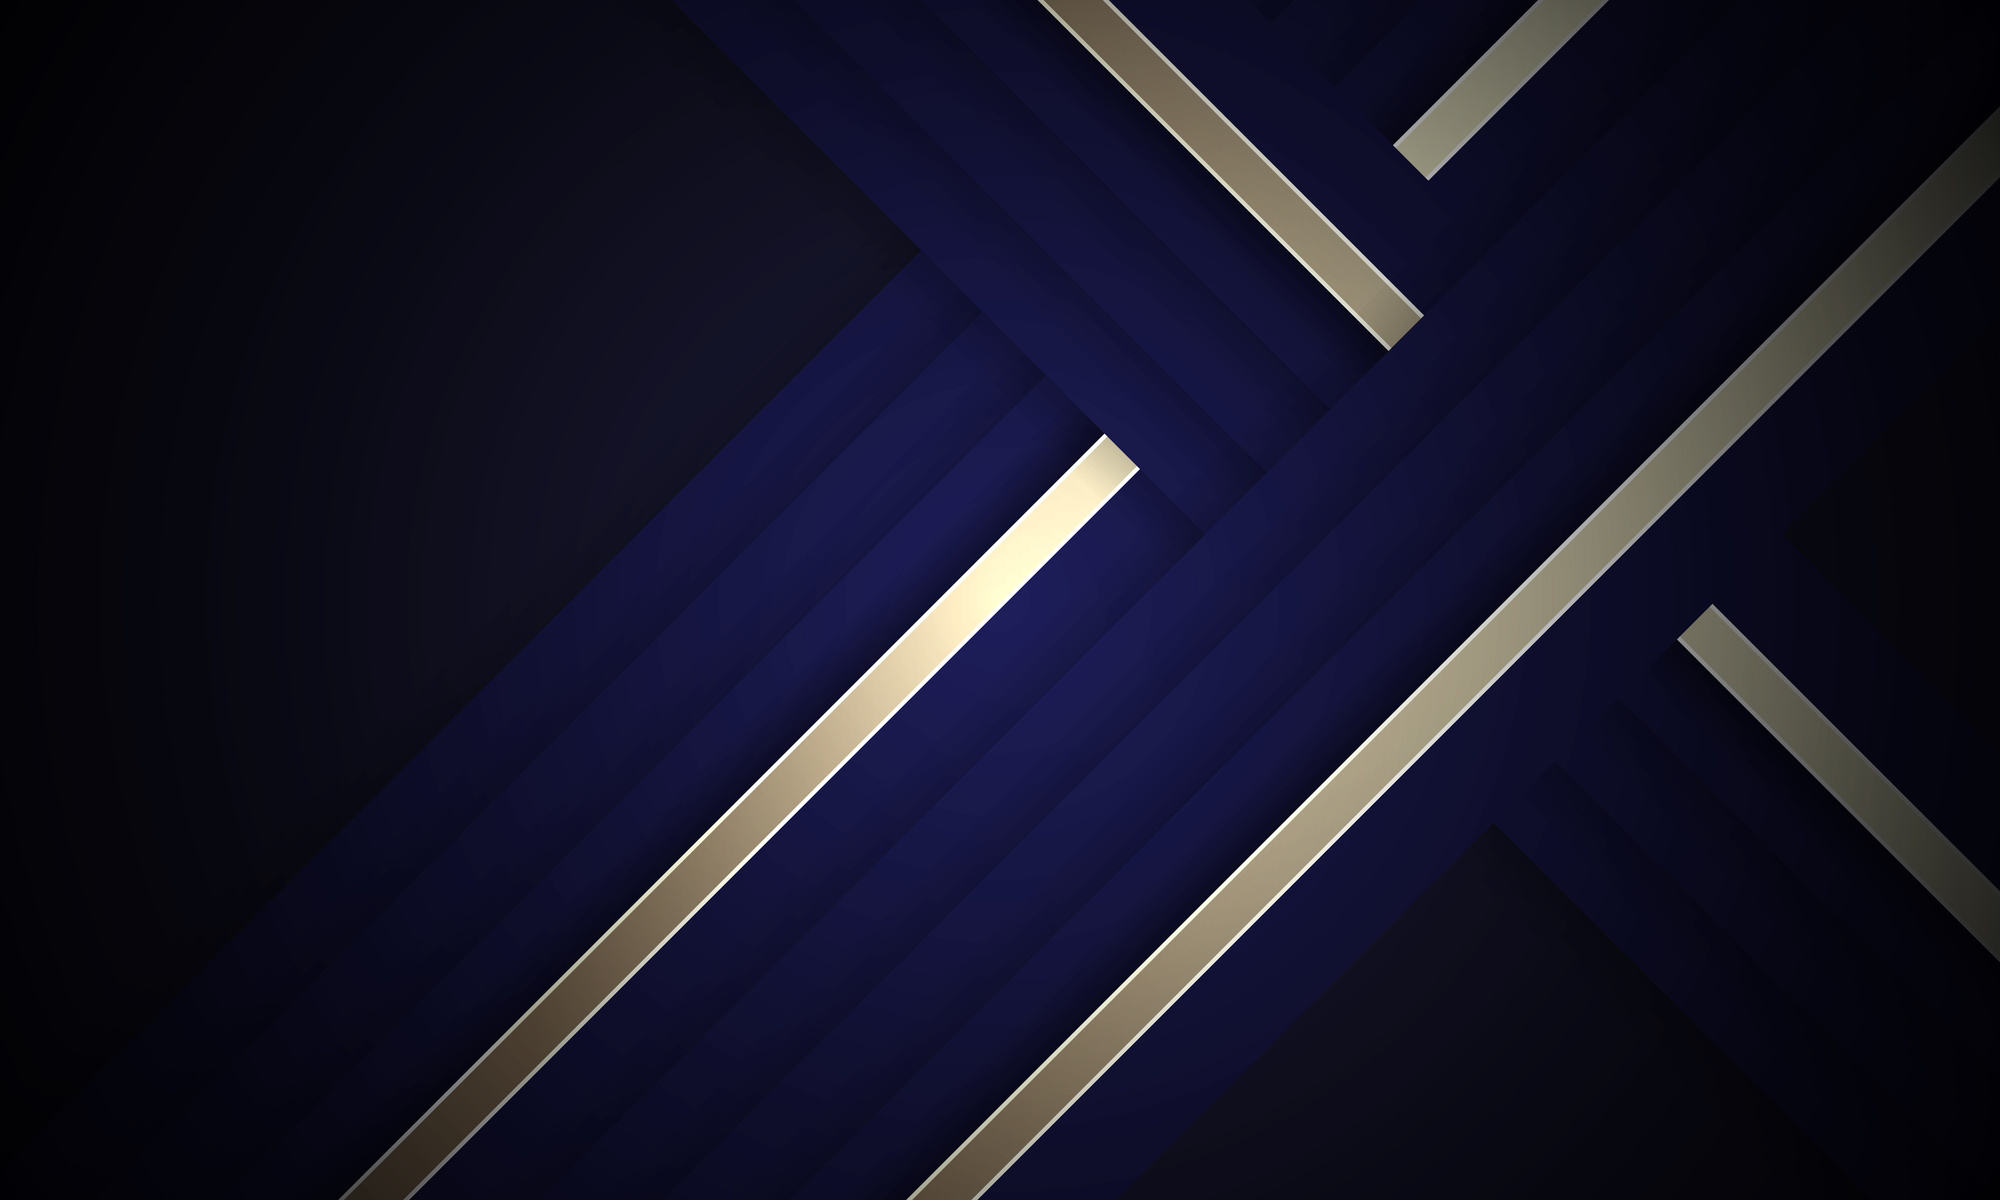 Dark navy blue abstract background with gold and blue lines.